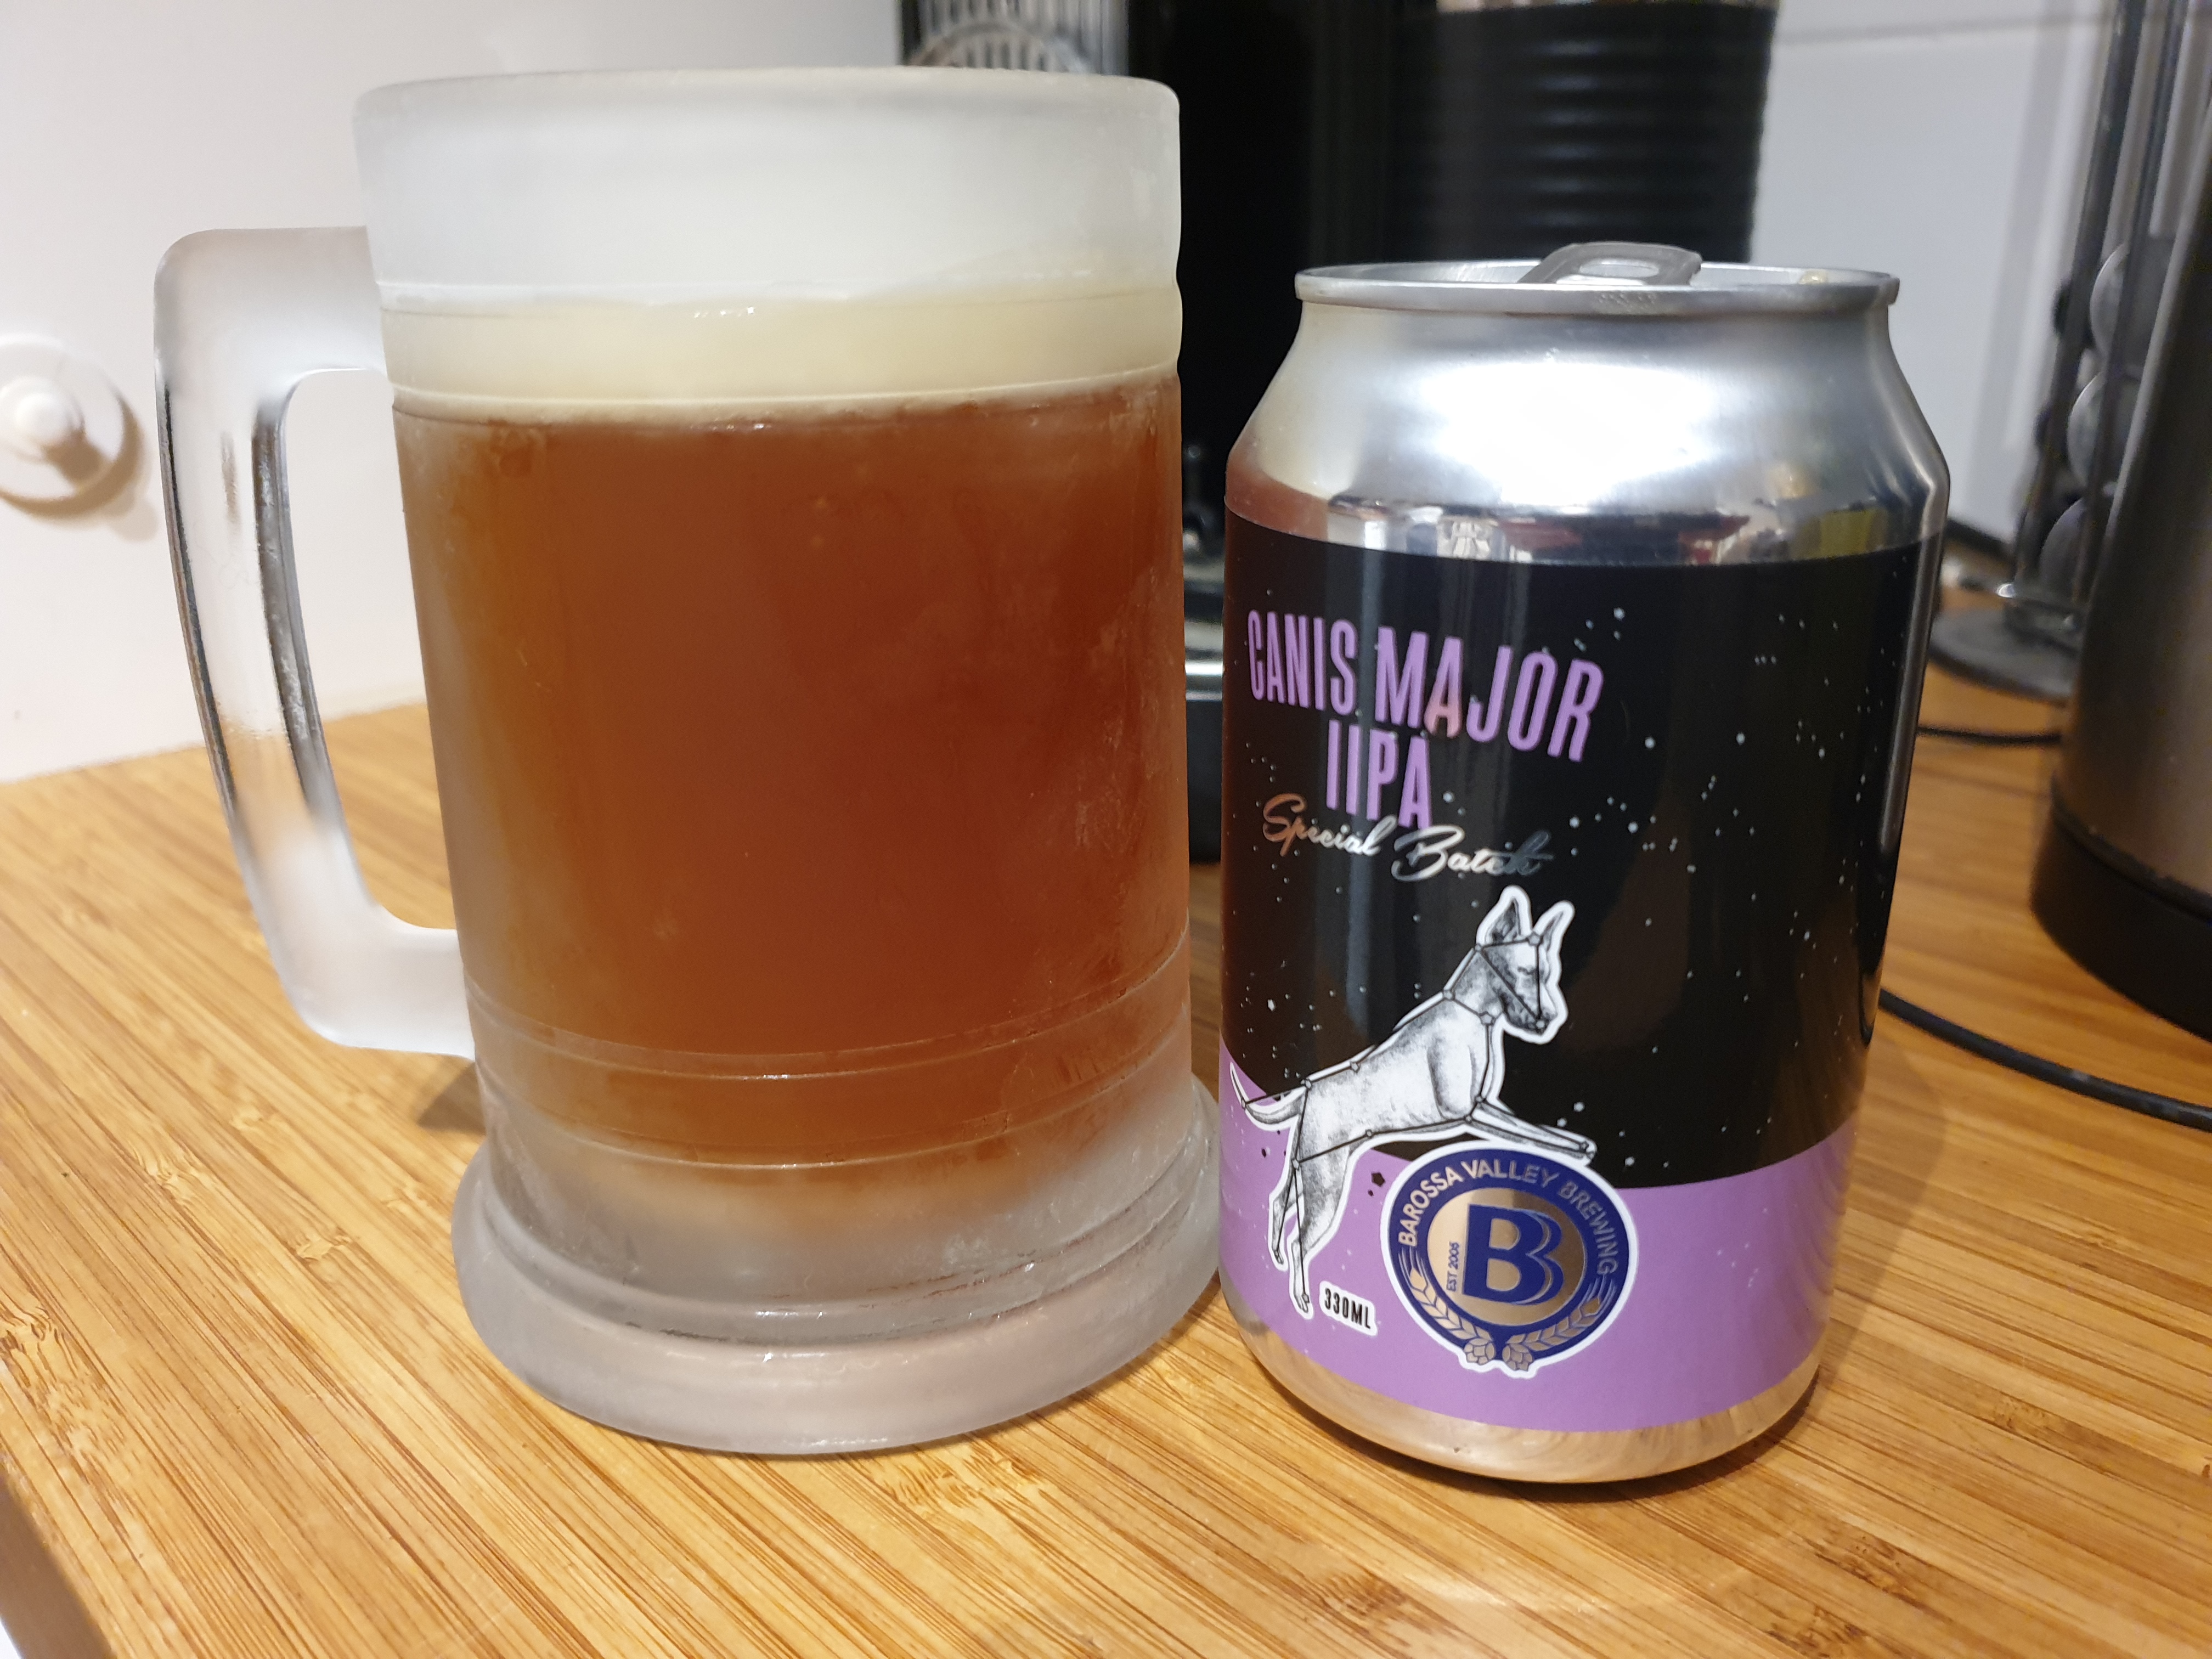 Canis Major by Barossa Valley Brewing